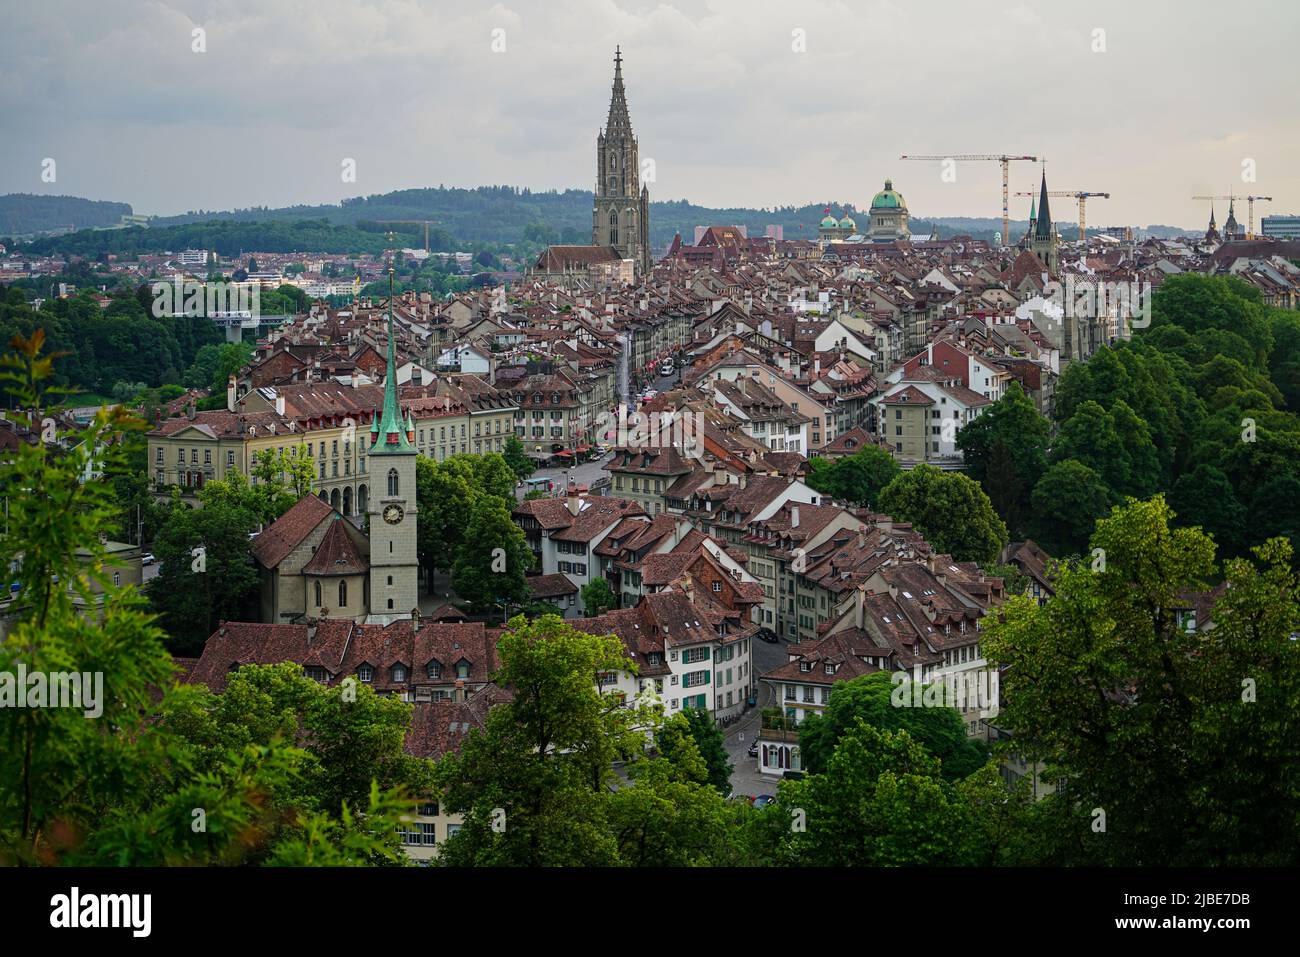 Panorama view of Berne old town from top in rose garden Stock Photo